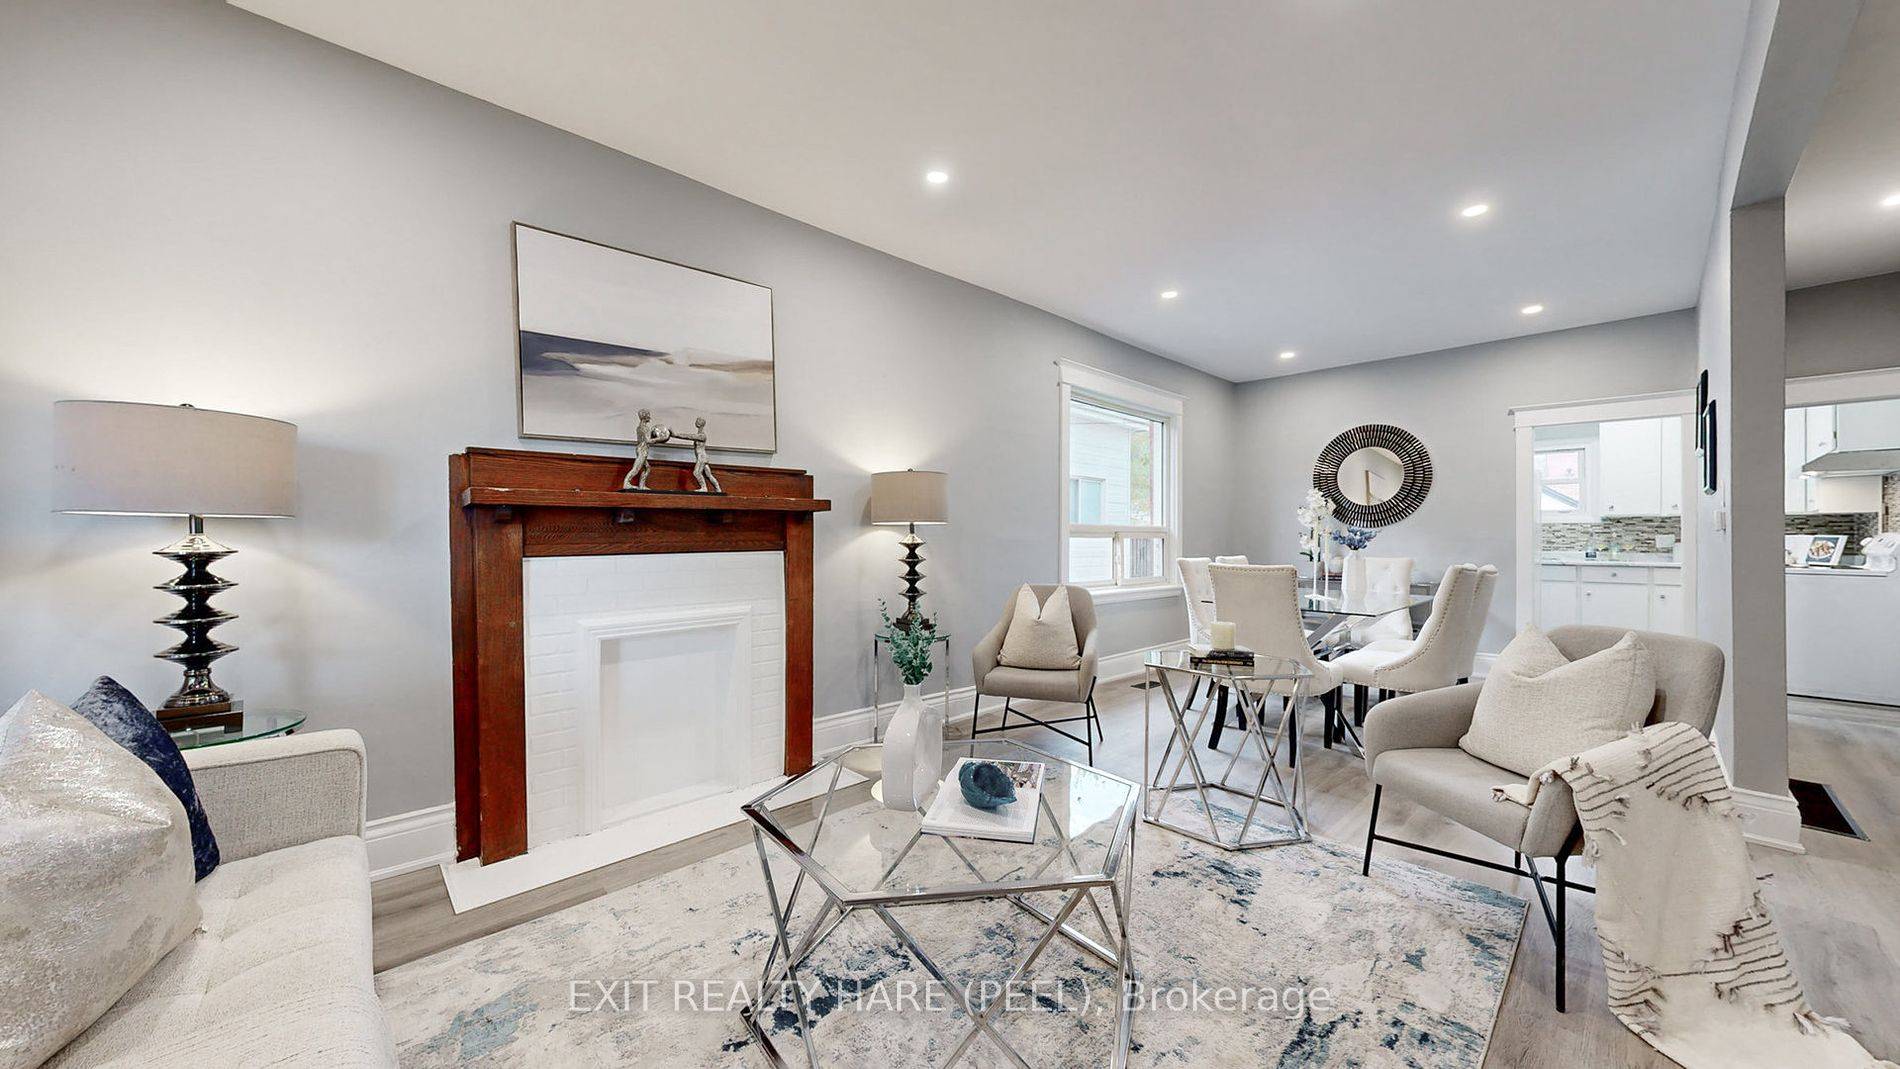 Enhance your lifestyle in this beautifully renovated detached home.